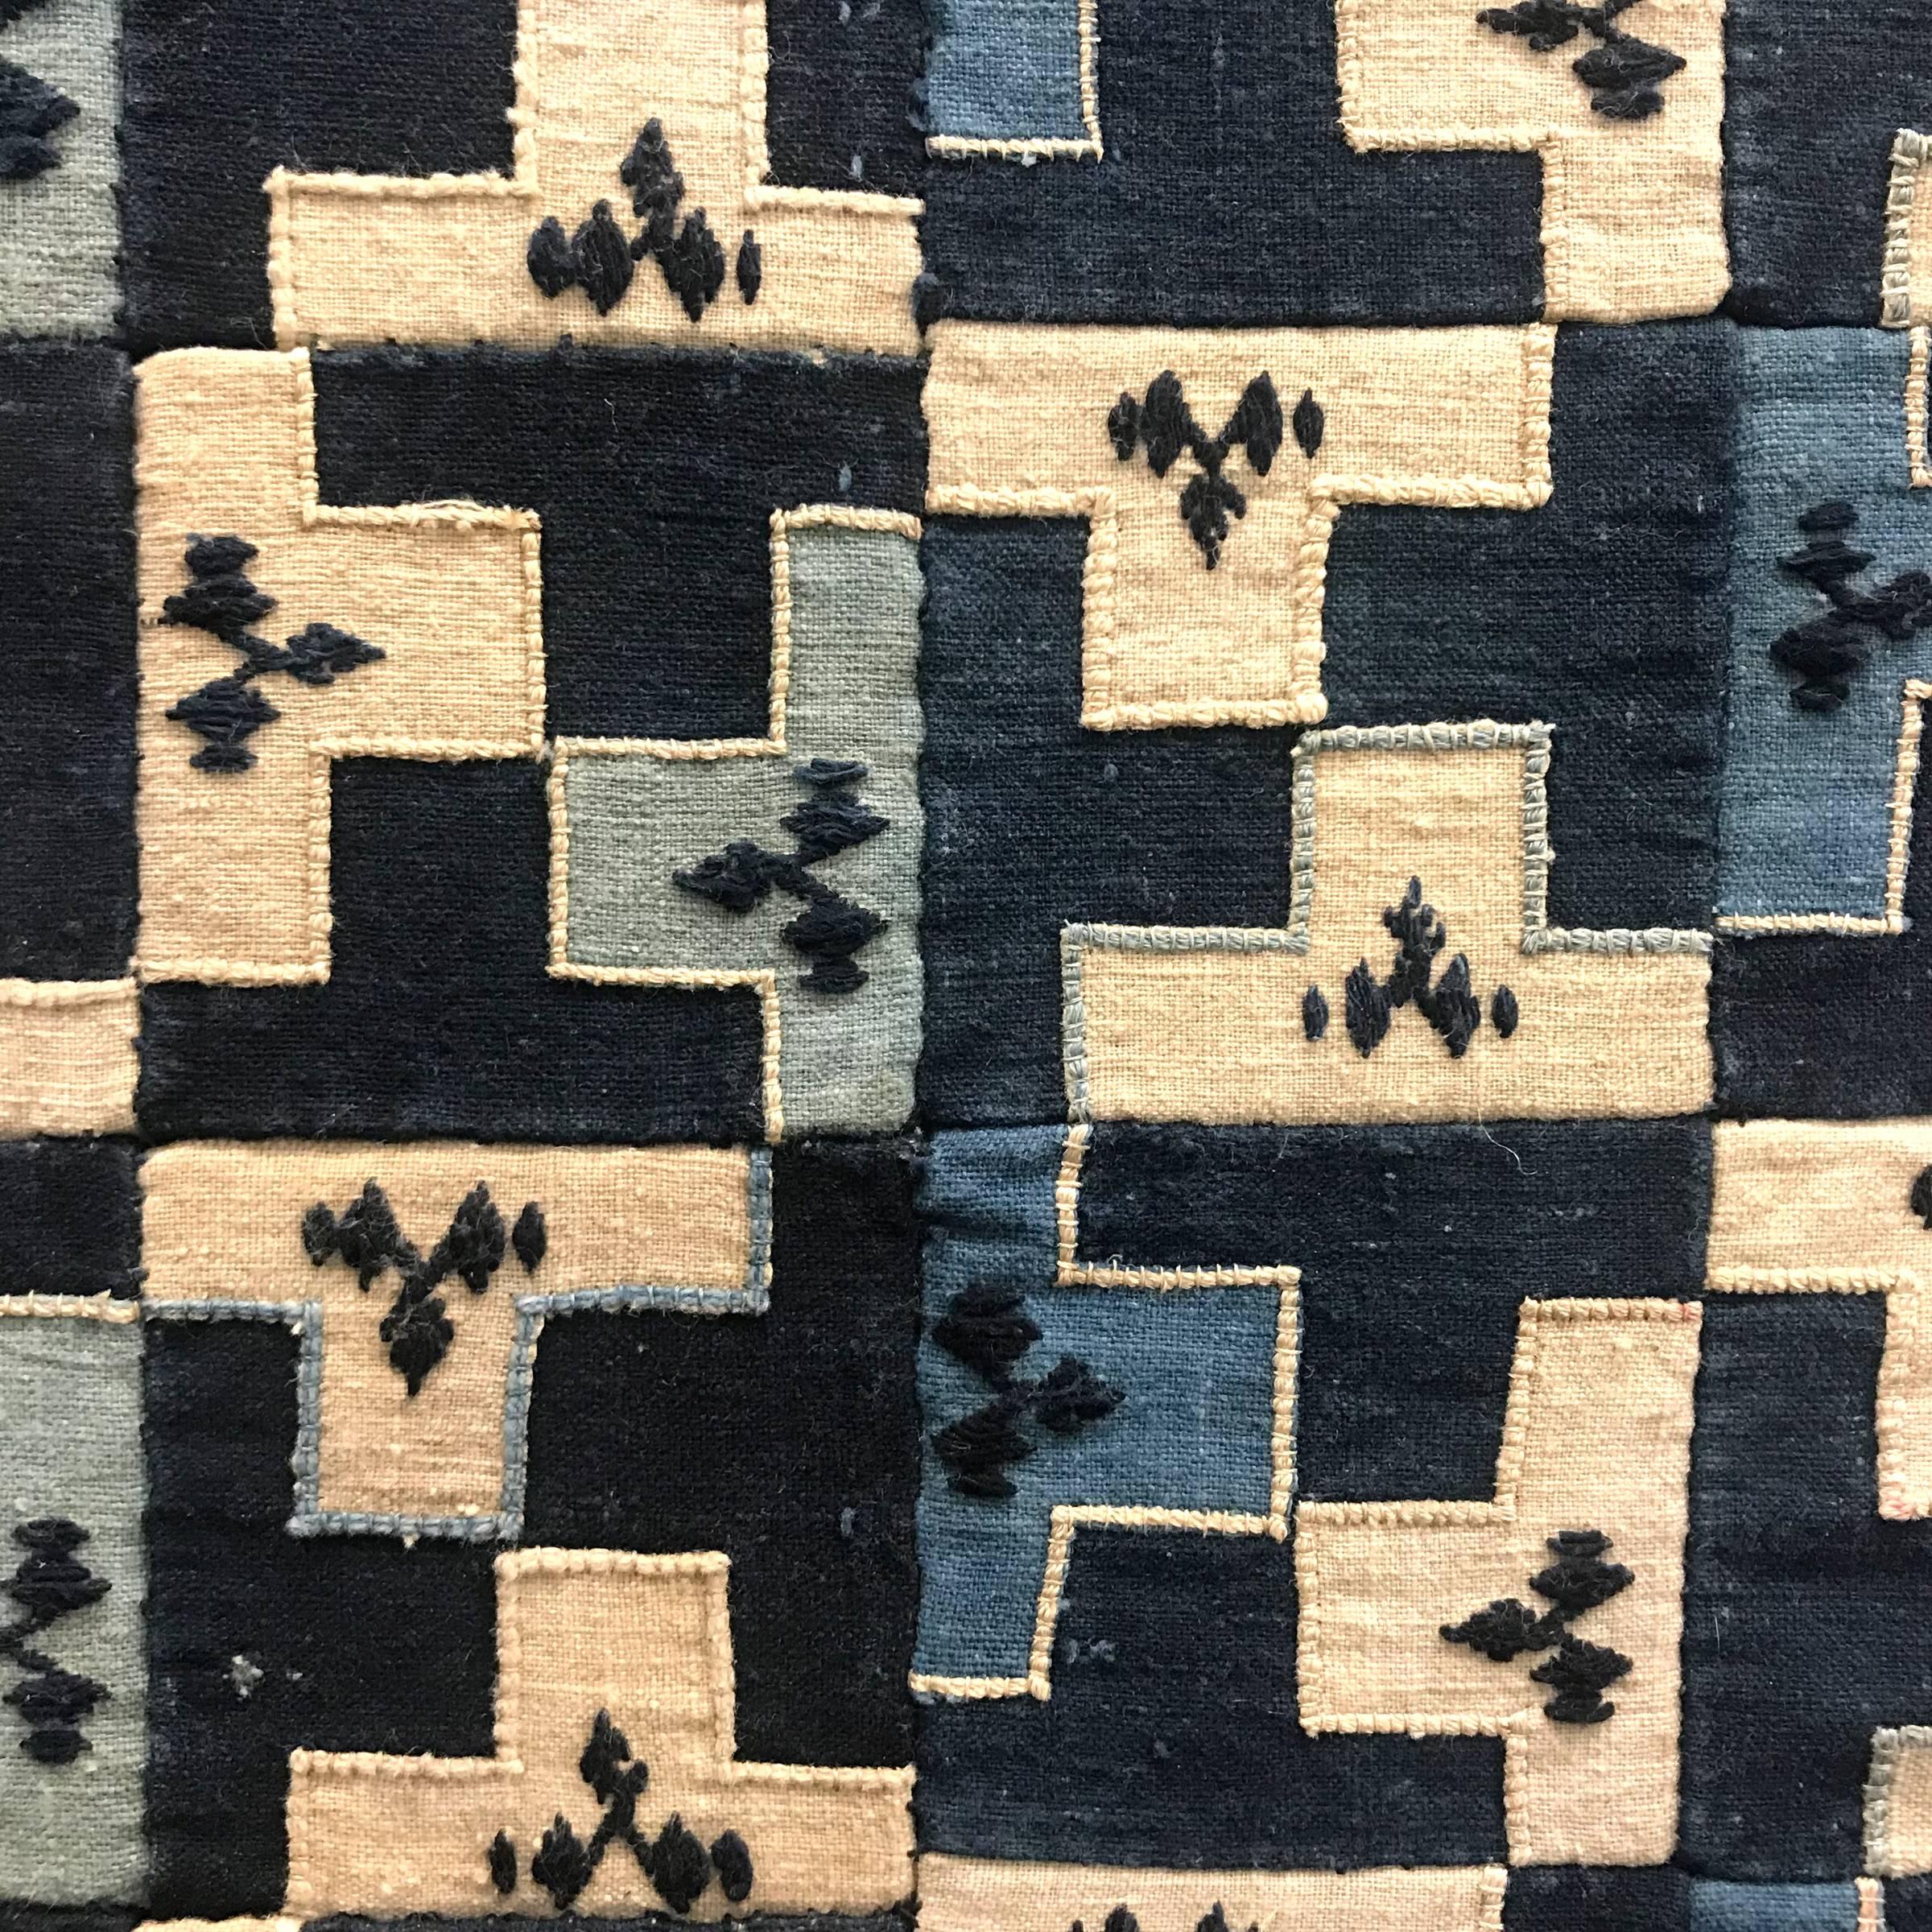 A wonderful early 20th century Chinese Minority indigo panel comprised of multiple embroidered squares pieced together to create an all-over meandering motif pattern, framed with a solid indigo band, and stretched over a simple stretcher. This panel